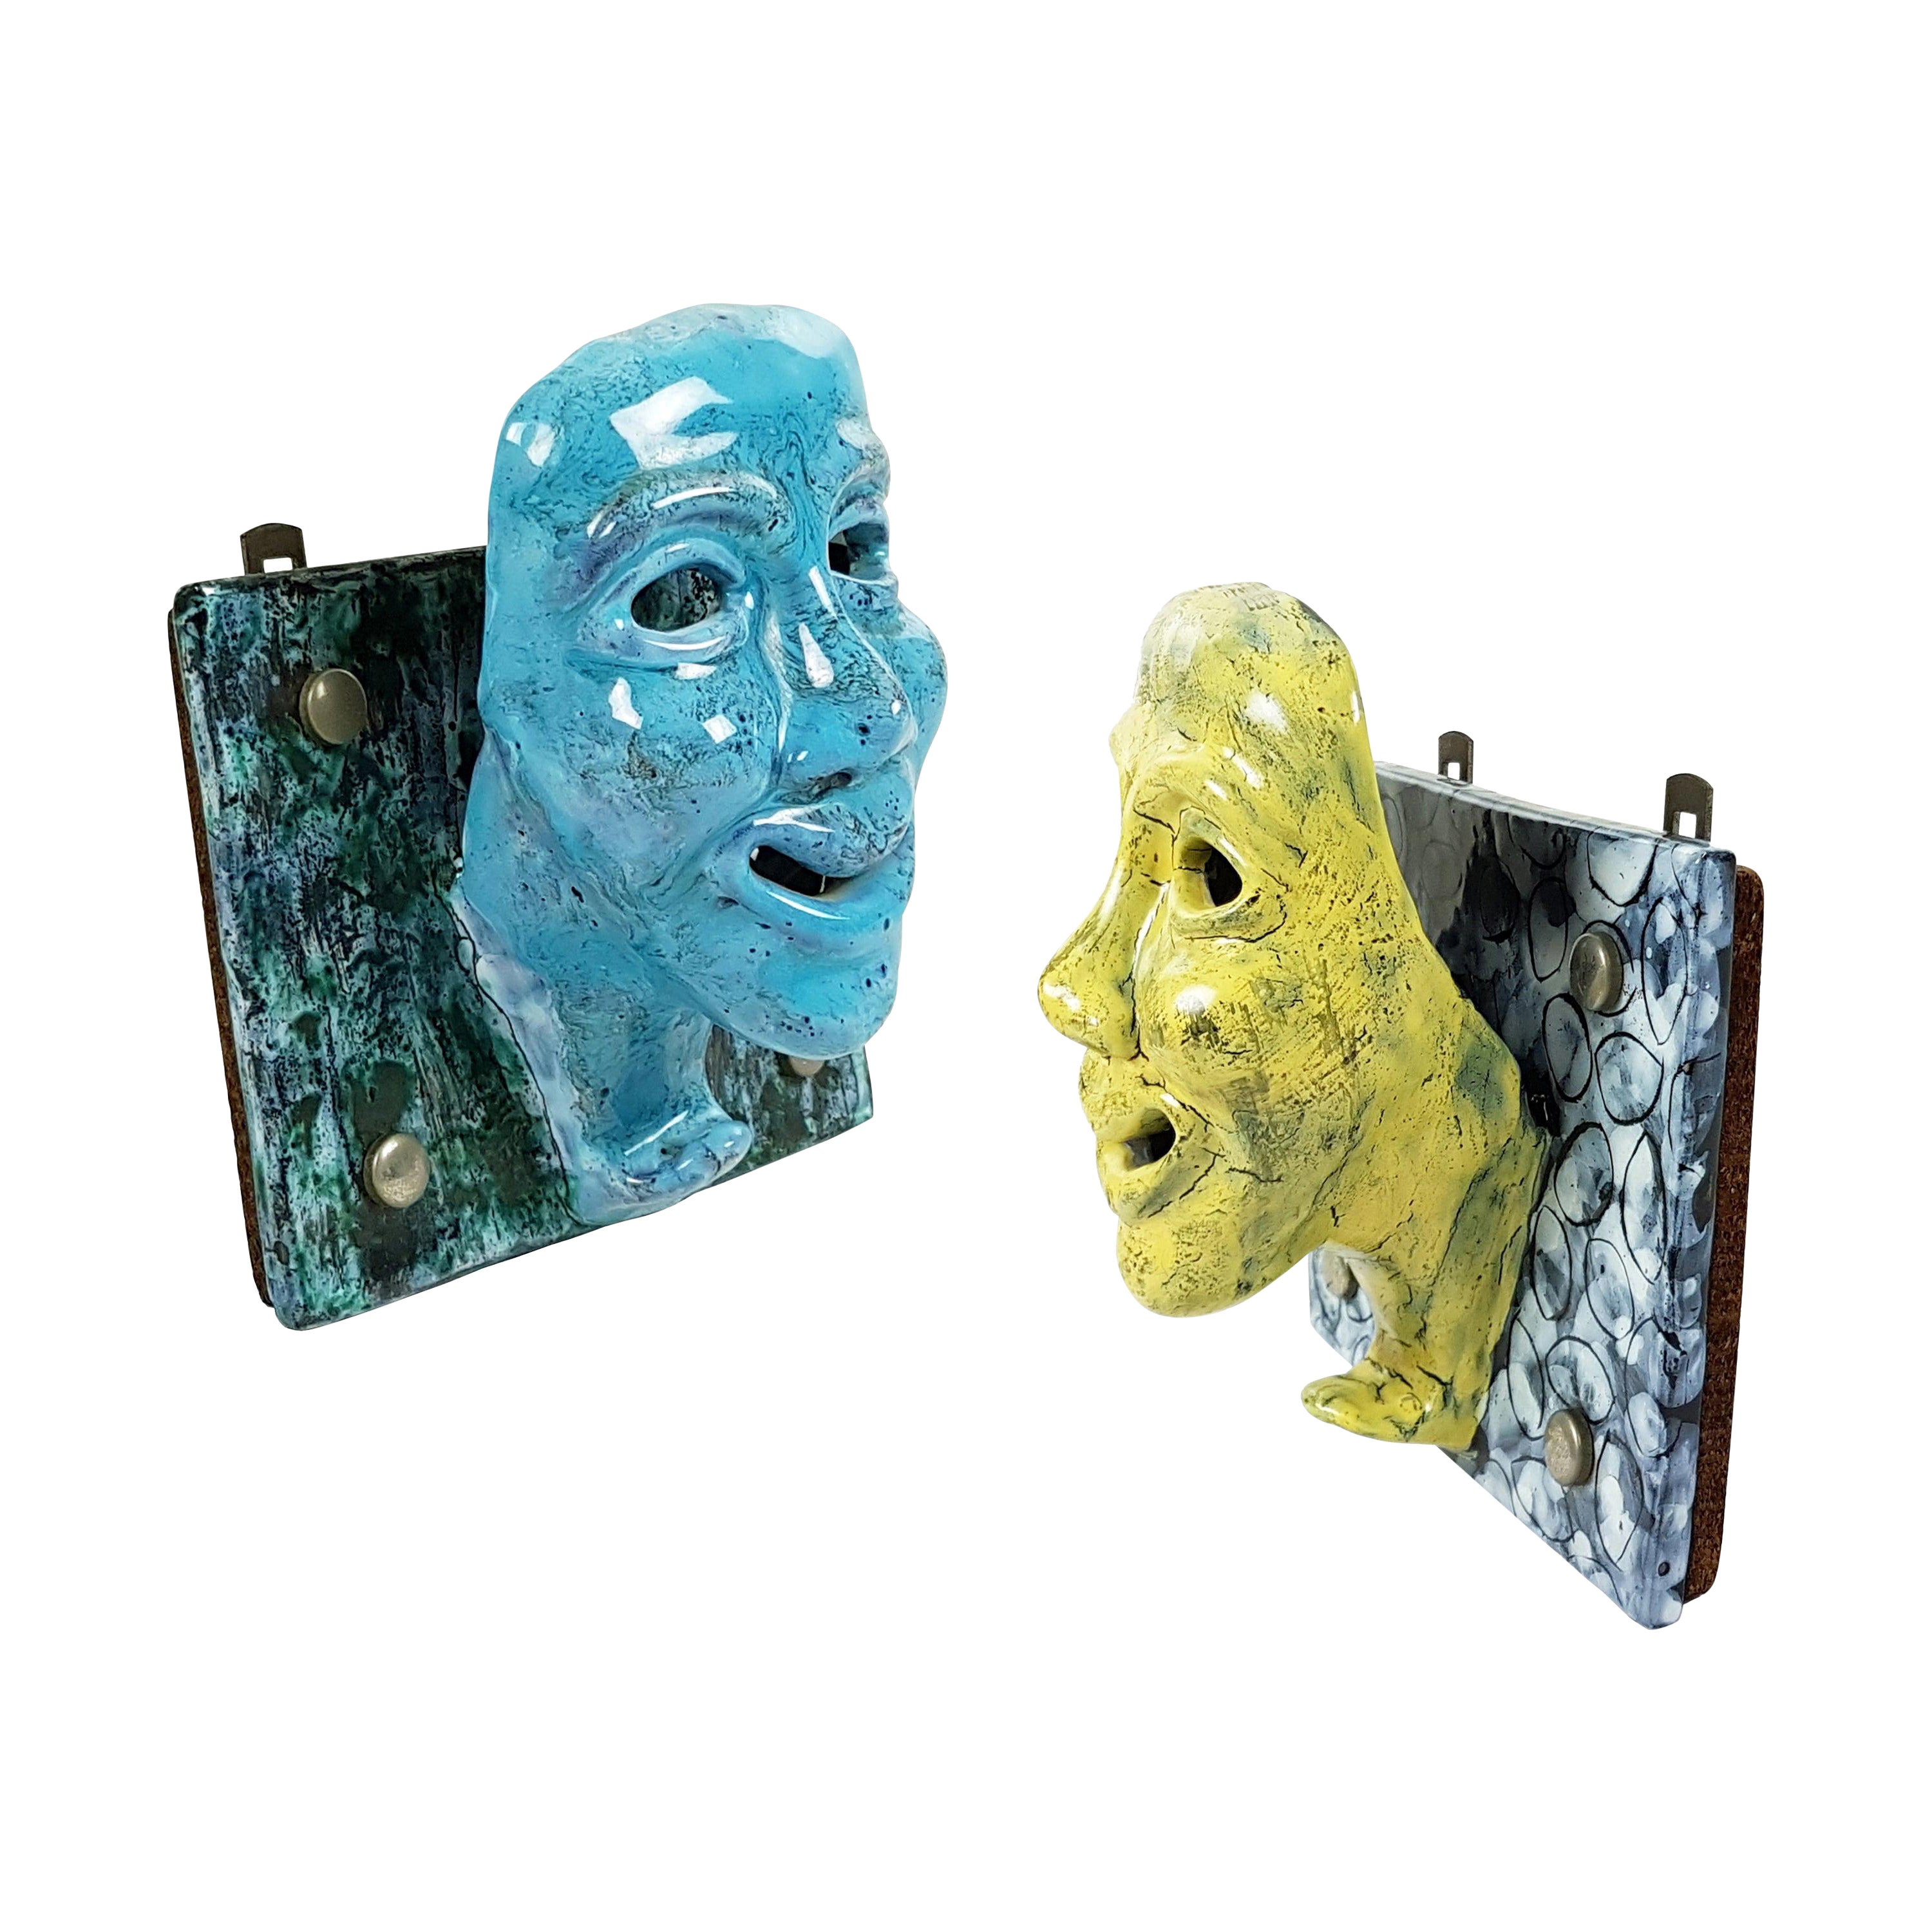 Pair of Blue and Yellow Ceramic Face-Shaped 1950s Wall Hanger by S. Polo